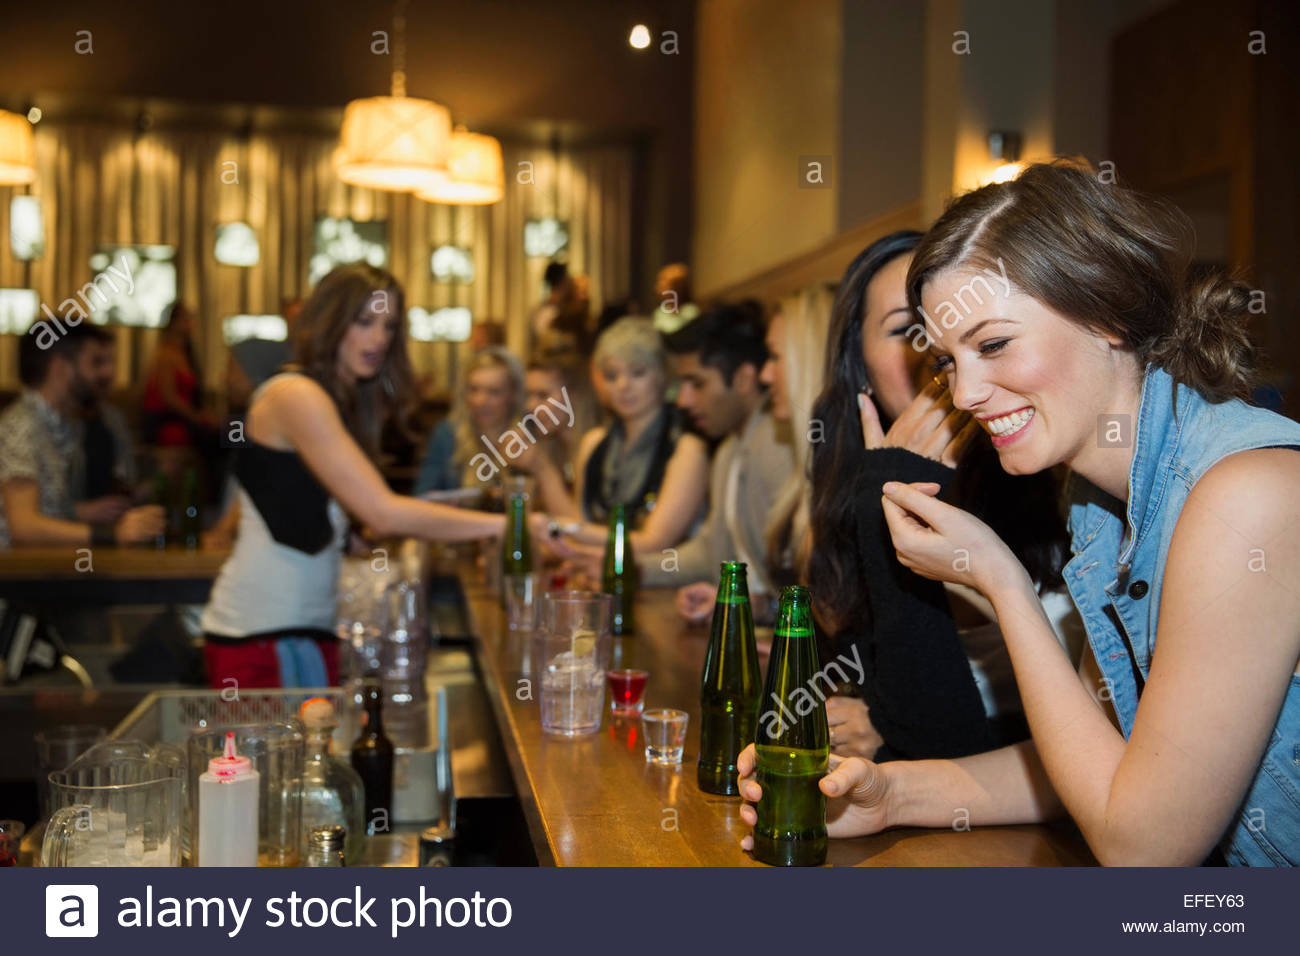 Women laughing and drinking at bar Stock Photo